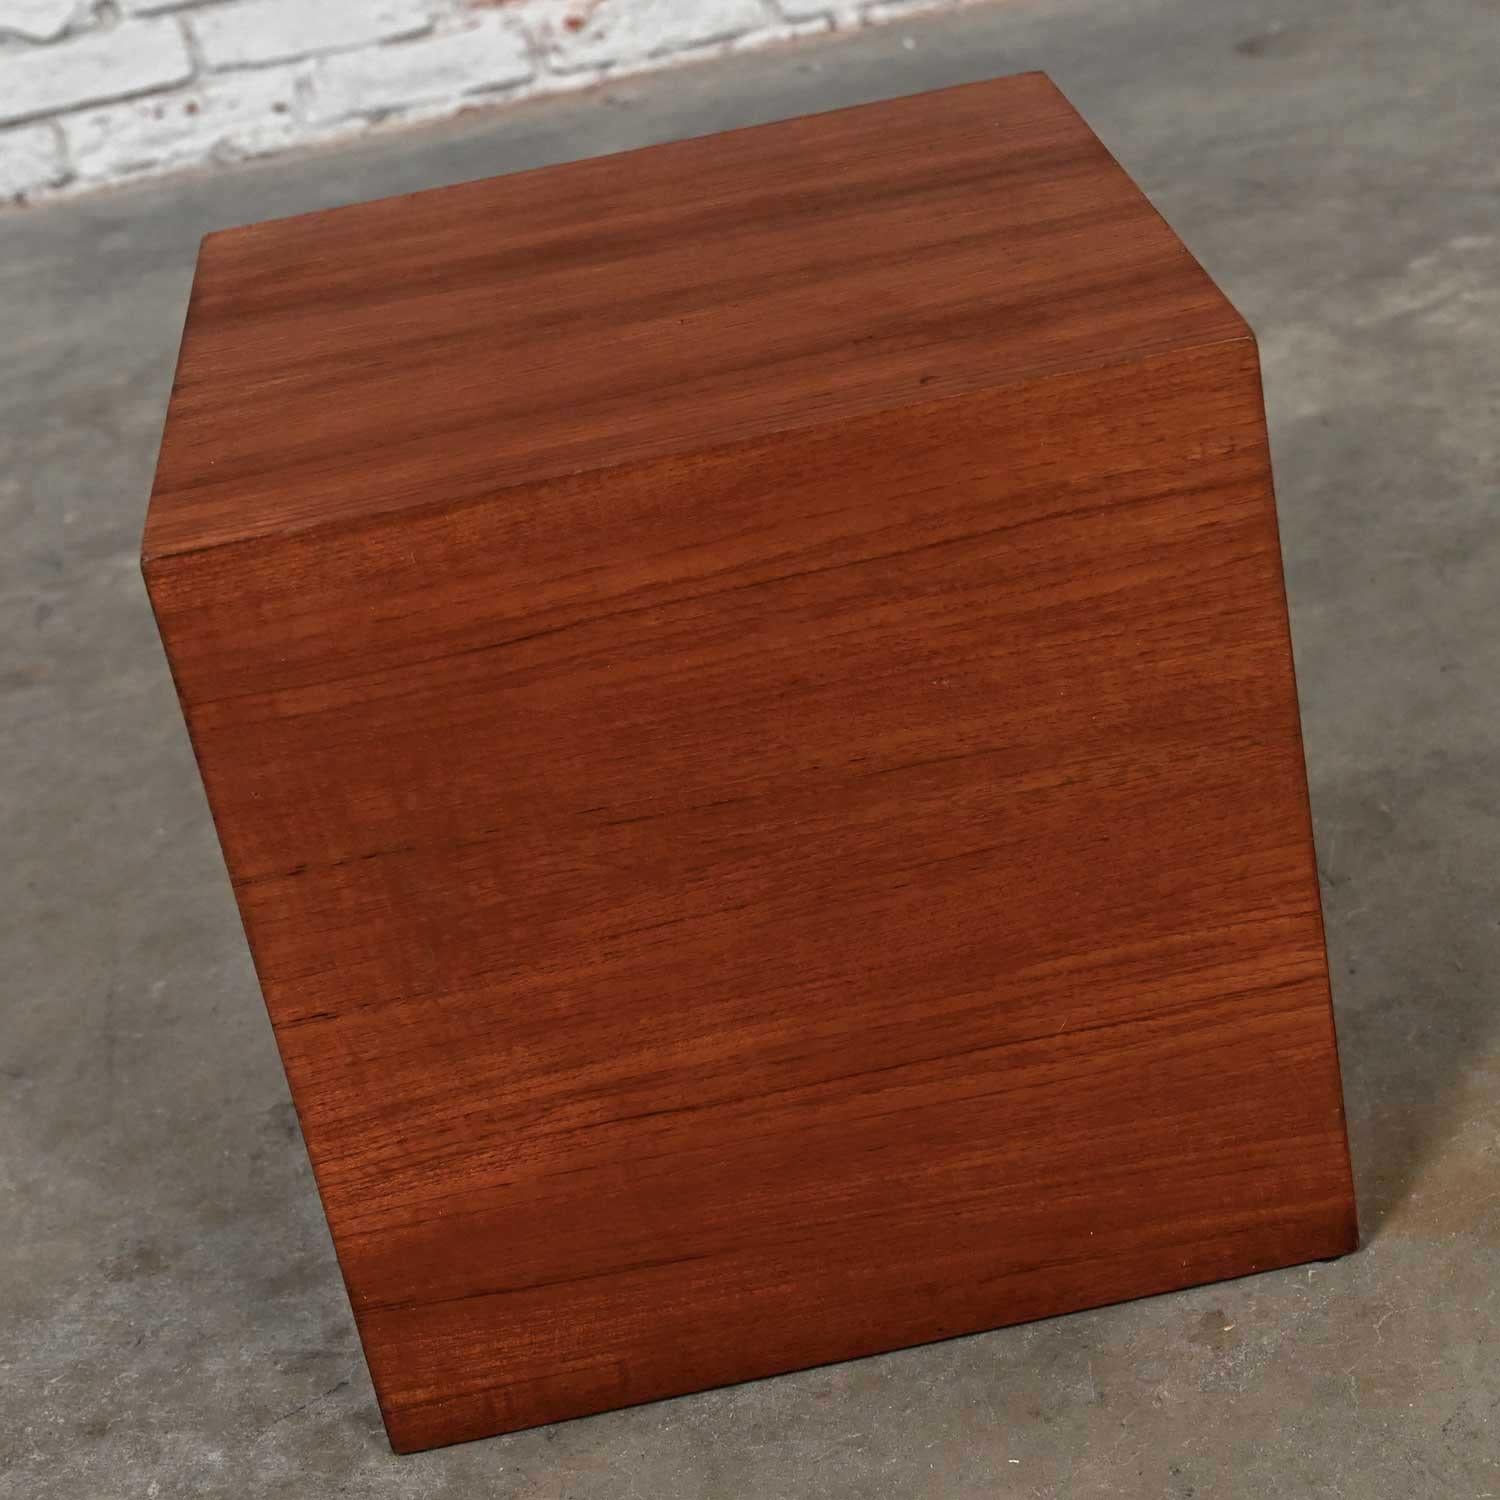 Wonderful vintage MCM (a.k.a. Mid-Century Modern) to Scandinavian Modern teak veneer cube side or end table. Beautiful condition, keeping in mind that this is vintage and not new so will have signs of use and wear. The corners had a bit of damage